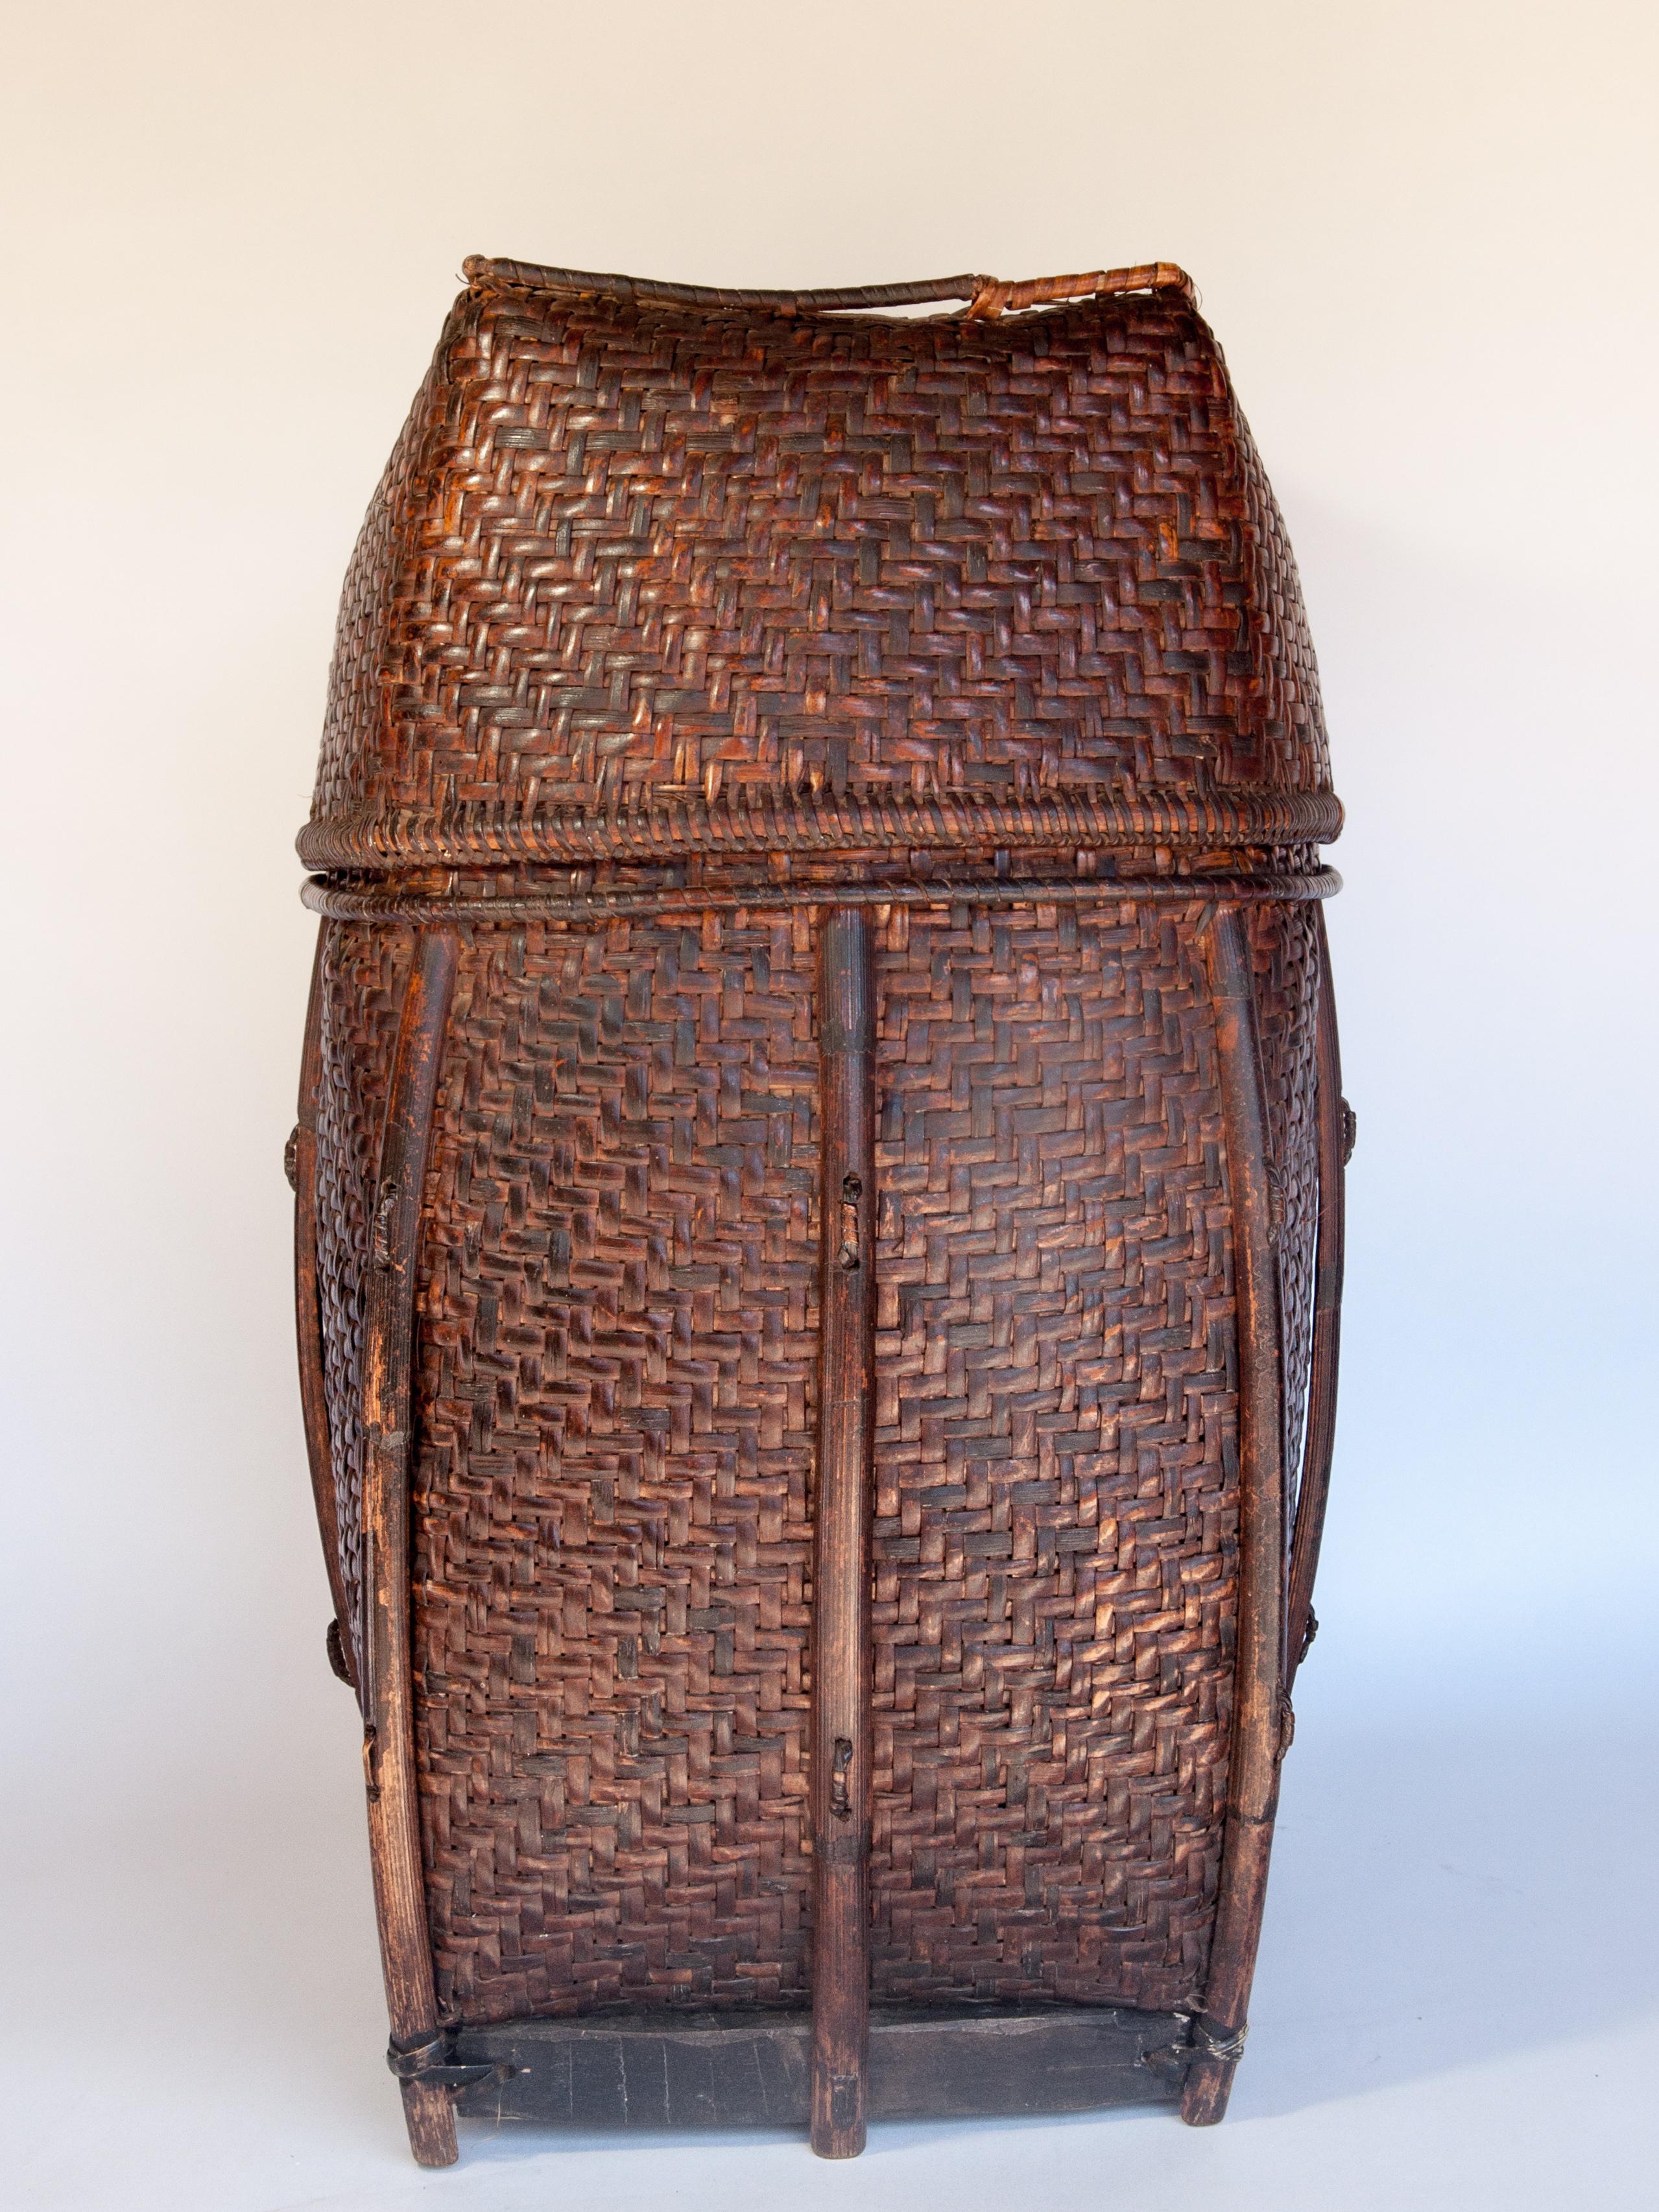 Hand-Crafted Vintage Bamboo Storage Basket from the Akha of North Thailand, Mid-20th Century